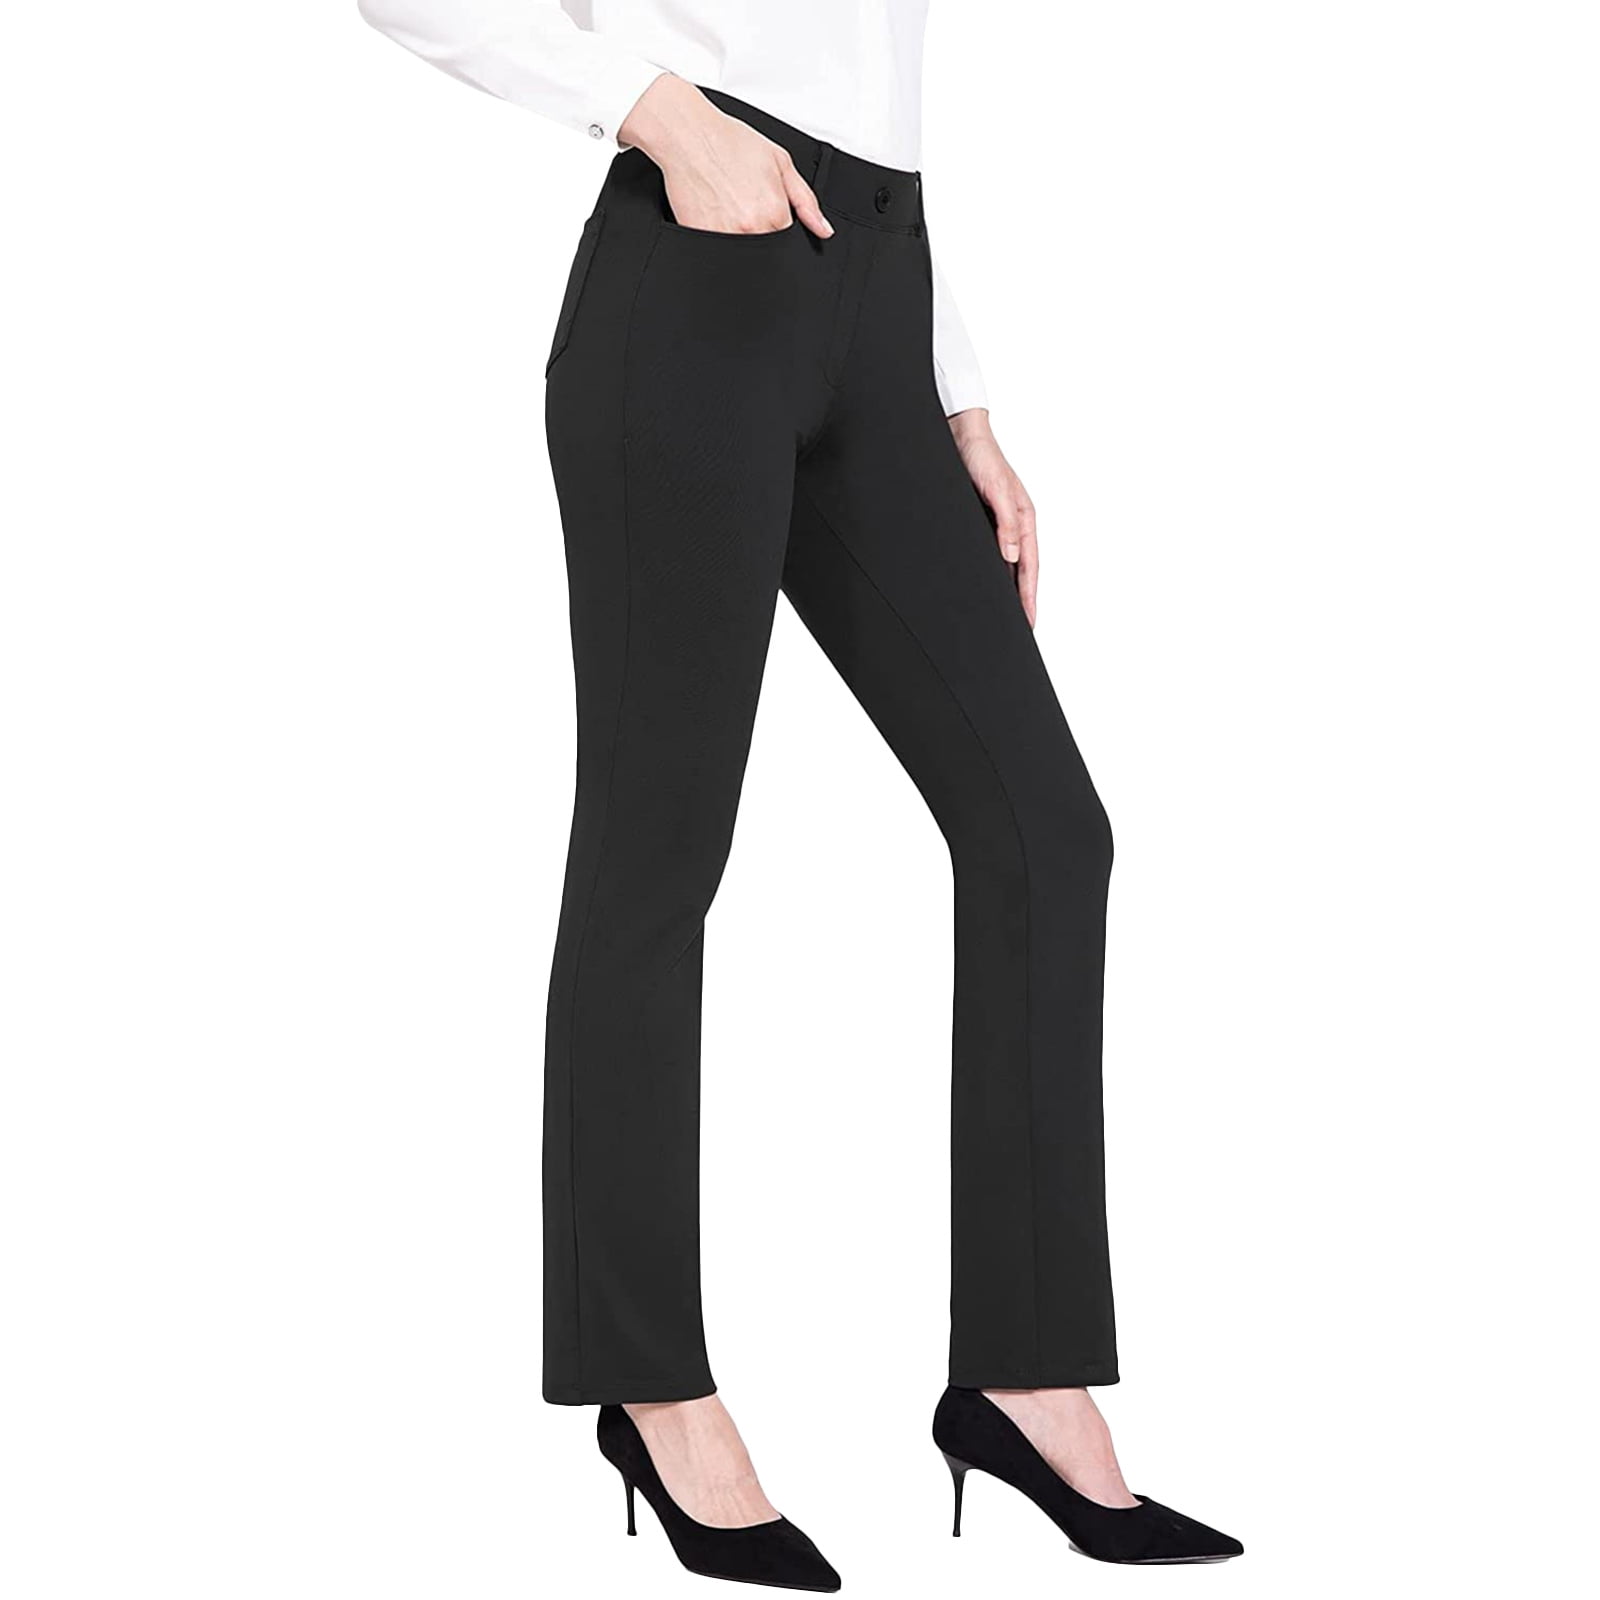 neezeelee Dress Pants for Women Comfort High Waist Skinny Stretch Slim Fit  Leg Easy into Pull on Ponte Pants for Work (Black, 2 (X-Small)) at Amazon  Women's Clothing store